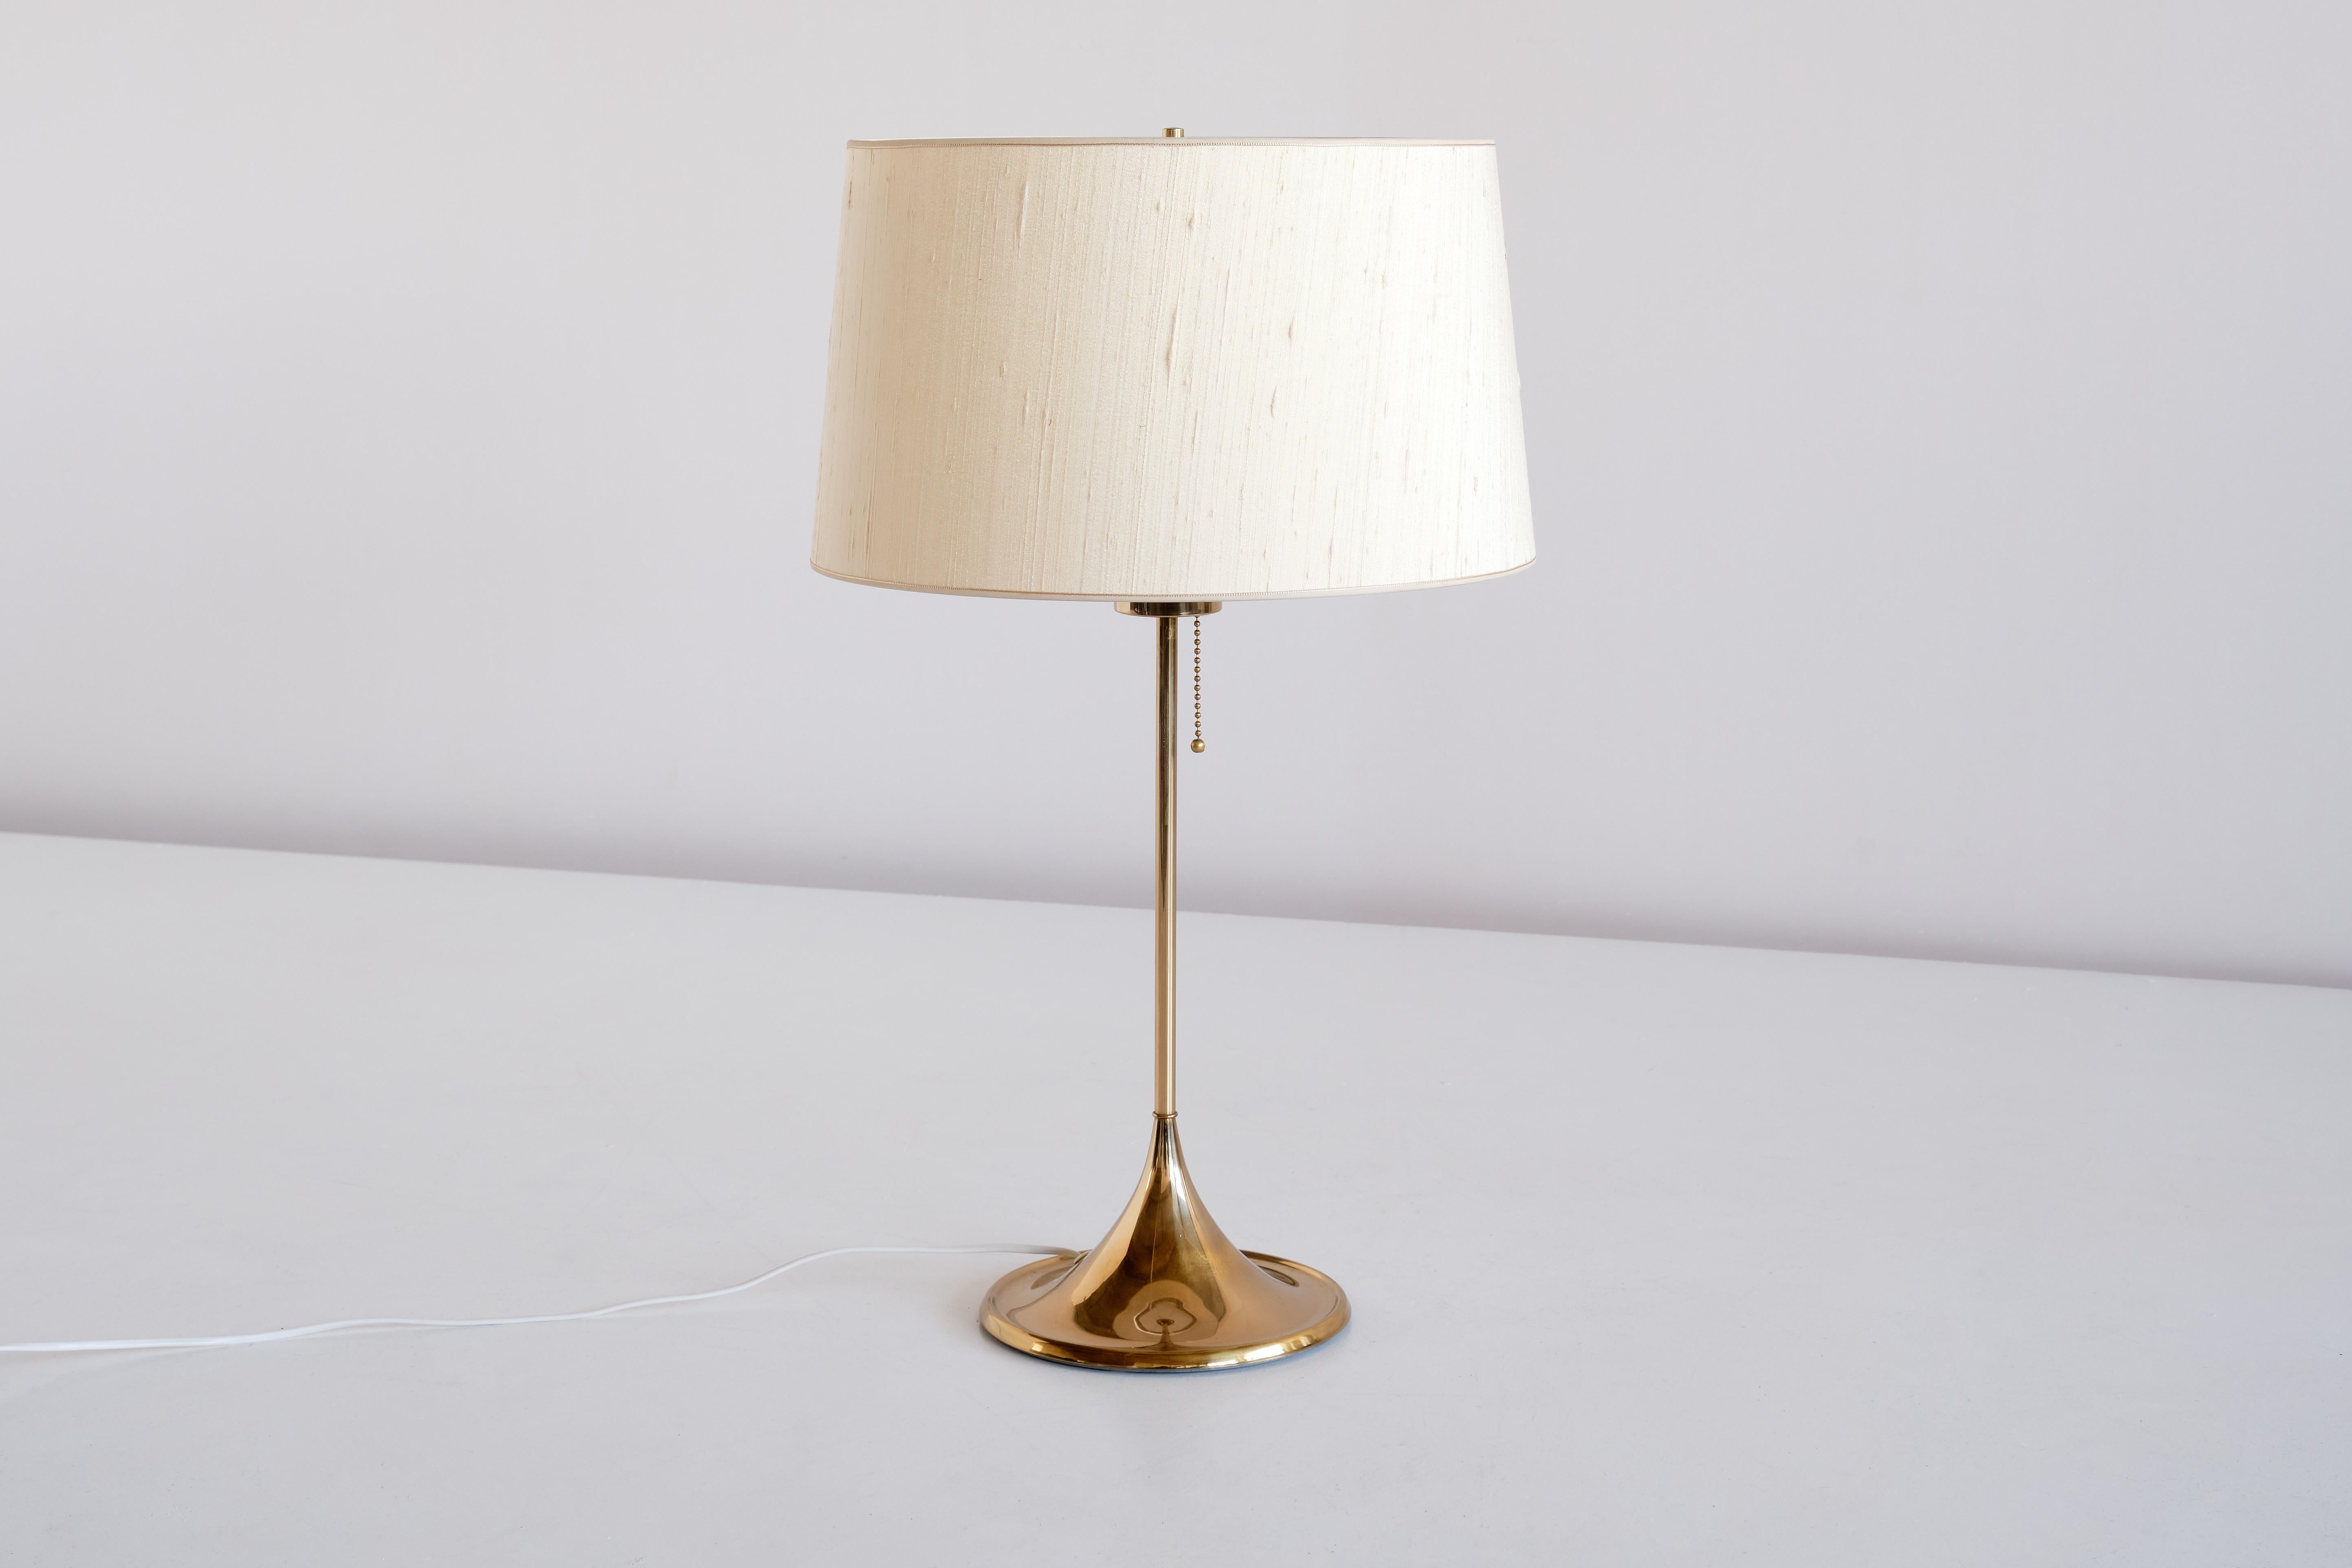 This elegant table lamp was produced by Bergboms in Sweden in the 1960s. The model is numbered B-024.
The lamp consists of a polished brass stem and cone shaped base, acrylic top diffuser and a newly handmade shade. The texture of the beige silk